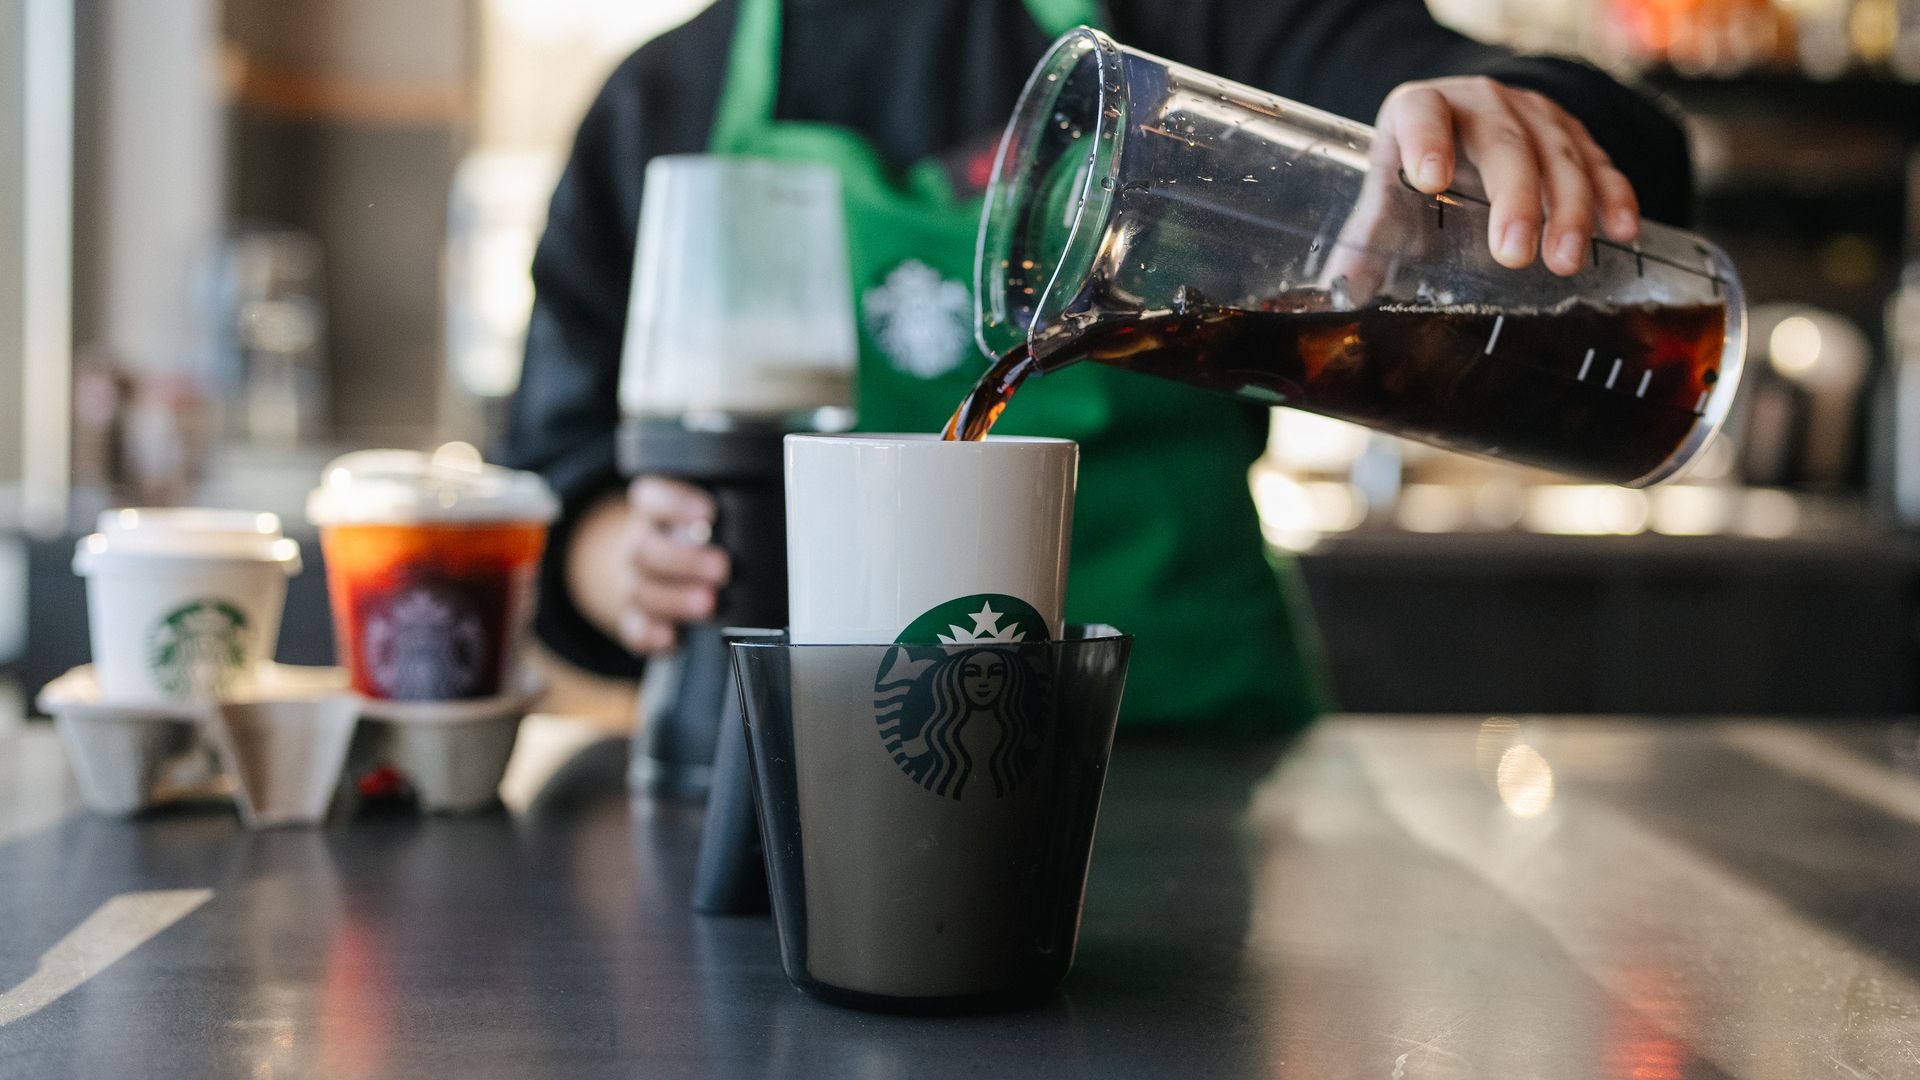 Starbucks barista pours coffee in a reusable cup for a take-out order.